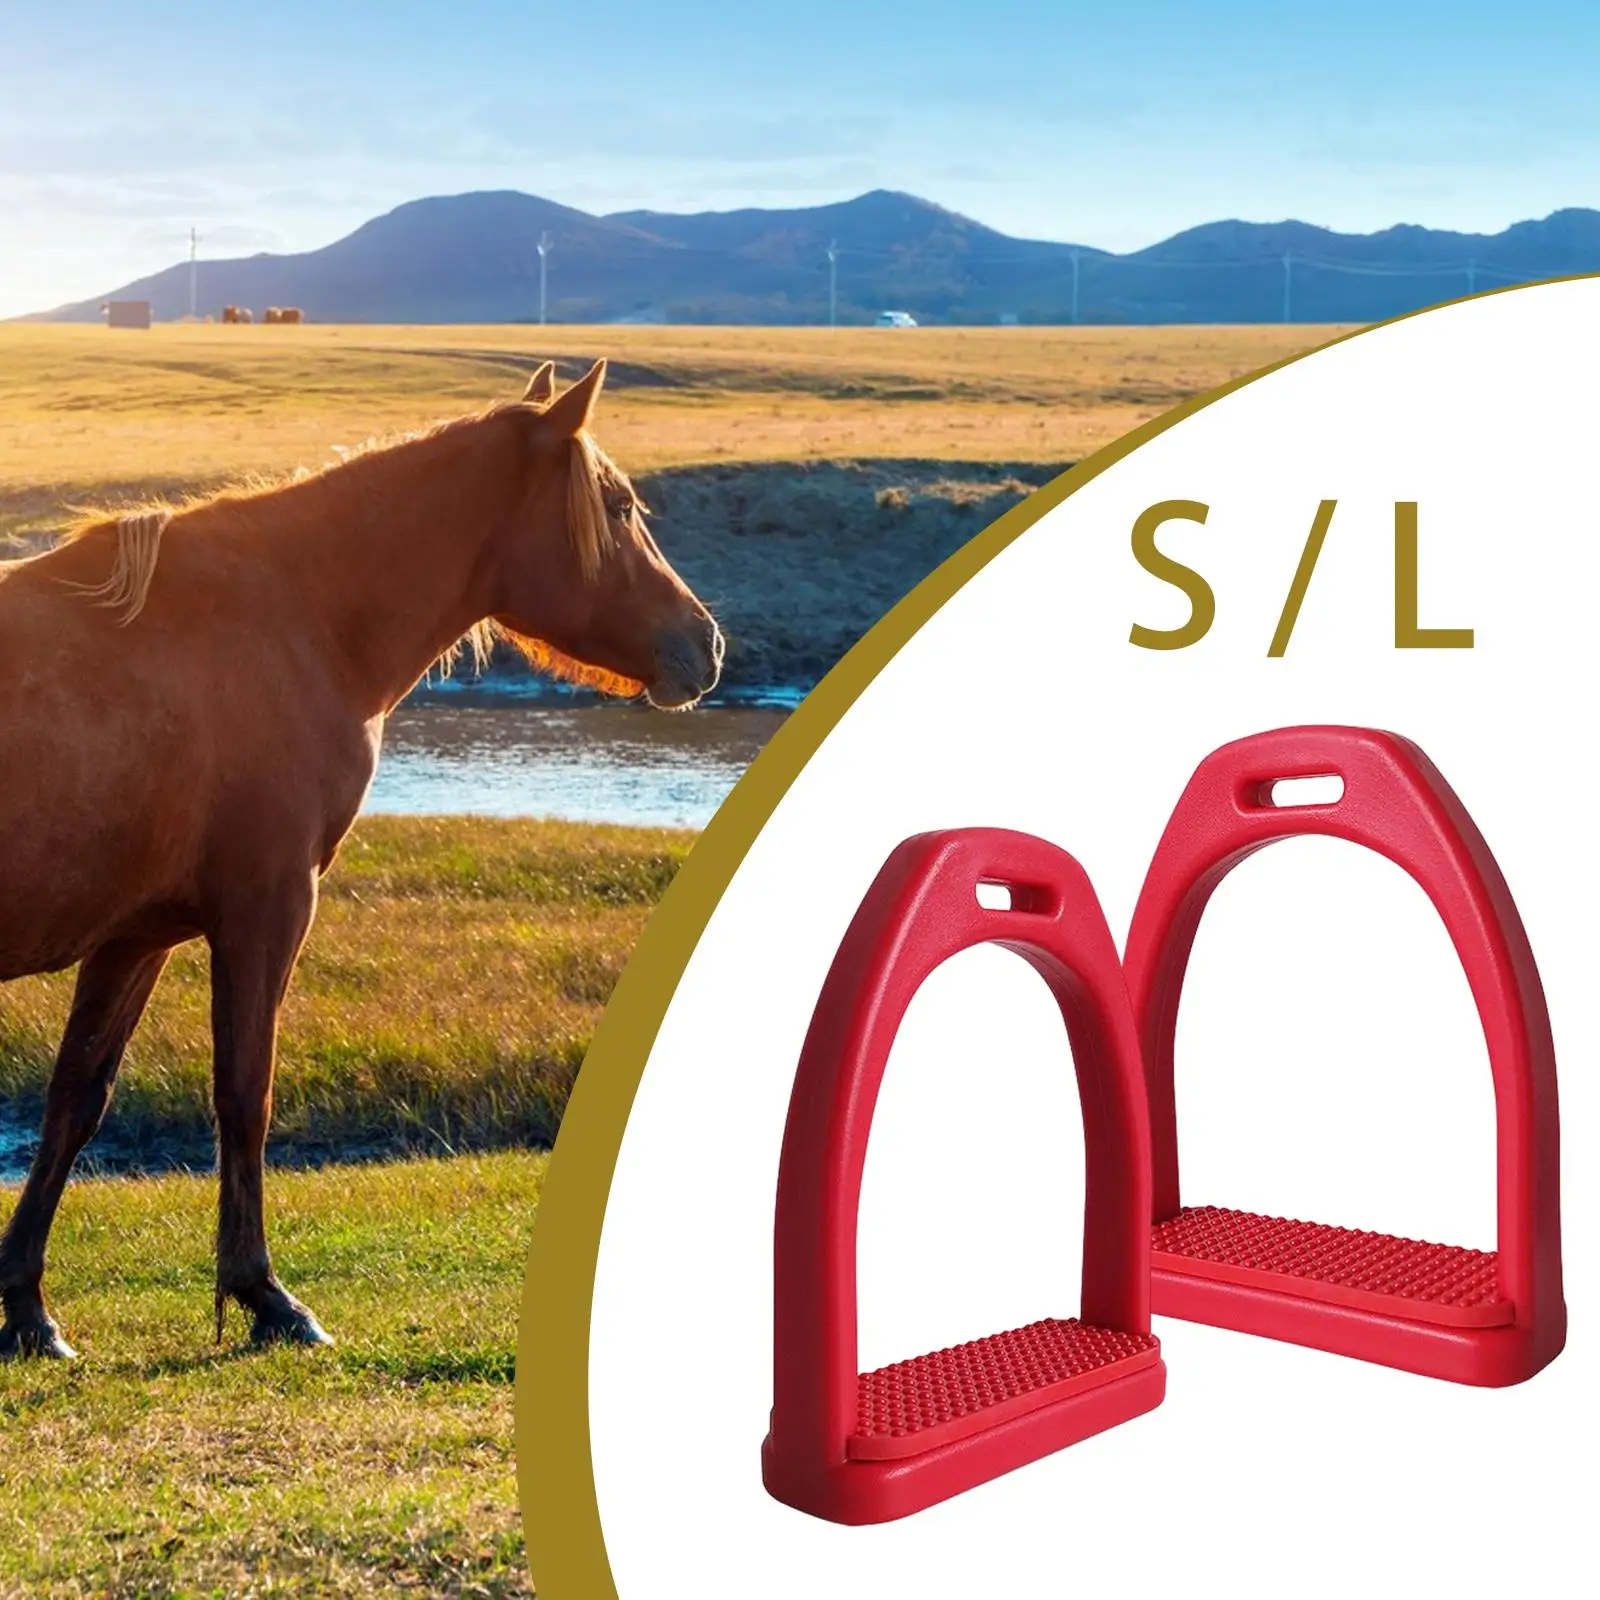 2Pcs Horse Riding Stirrups Equestrian Sports Training Tool Non Slip Rubber Pad for Horse Riding Outdoor Adults Supplies